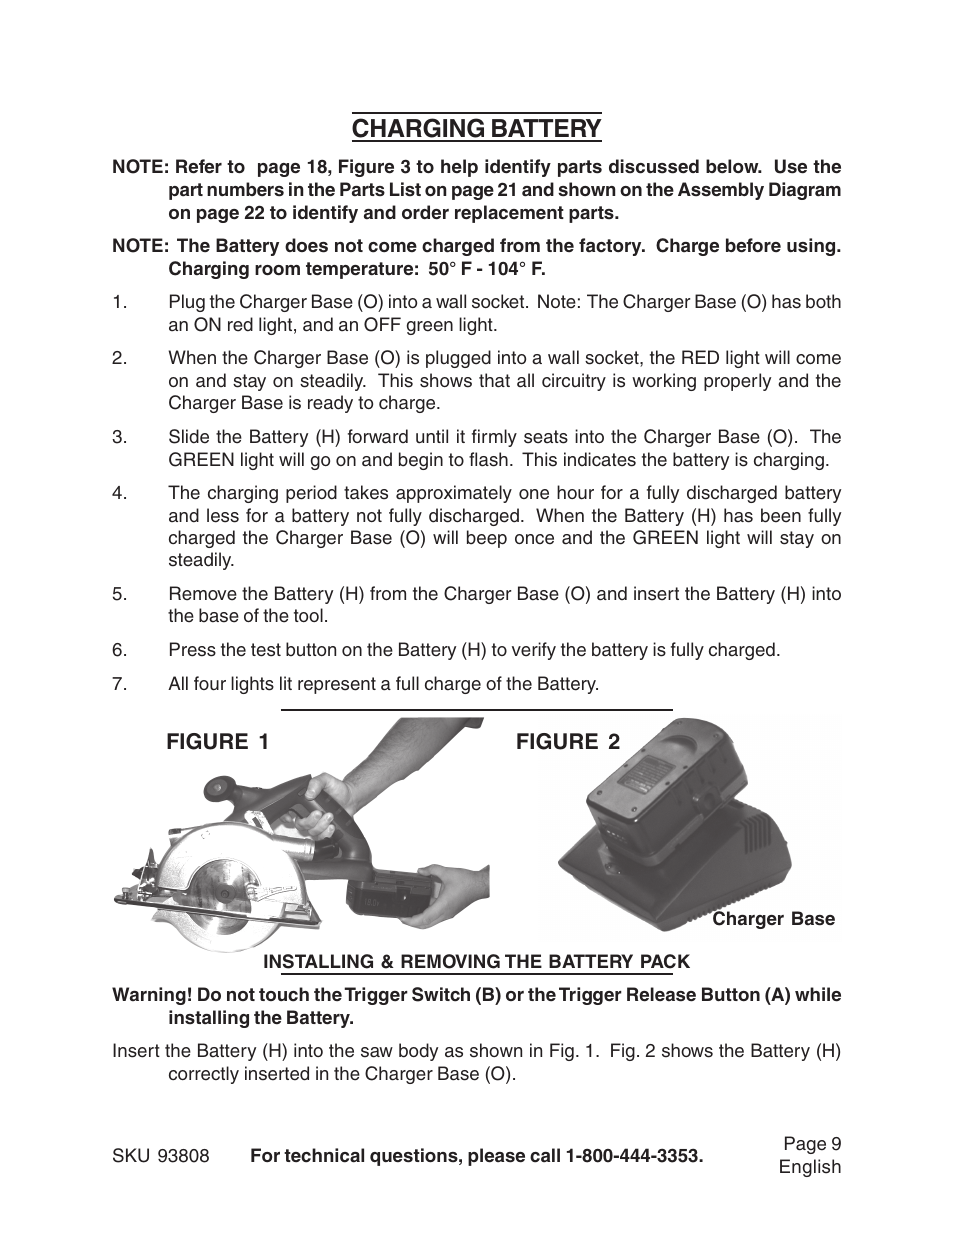 Charging battery | Harbor Freight Tools 93808 Manuel d'utilisation | Page 9 / 33